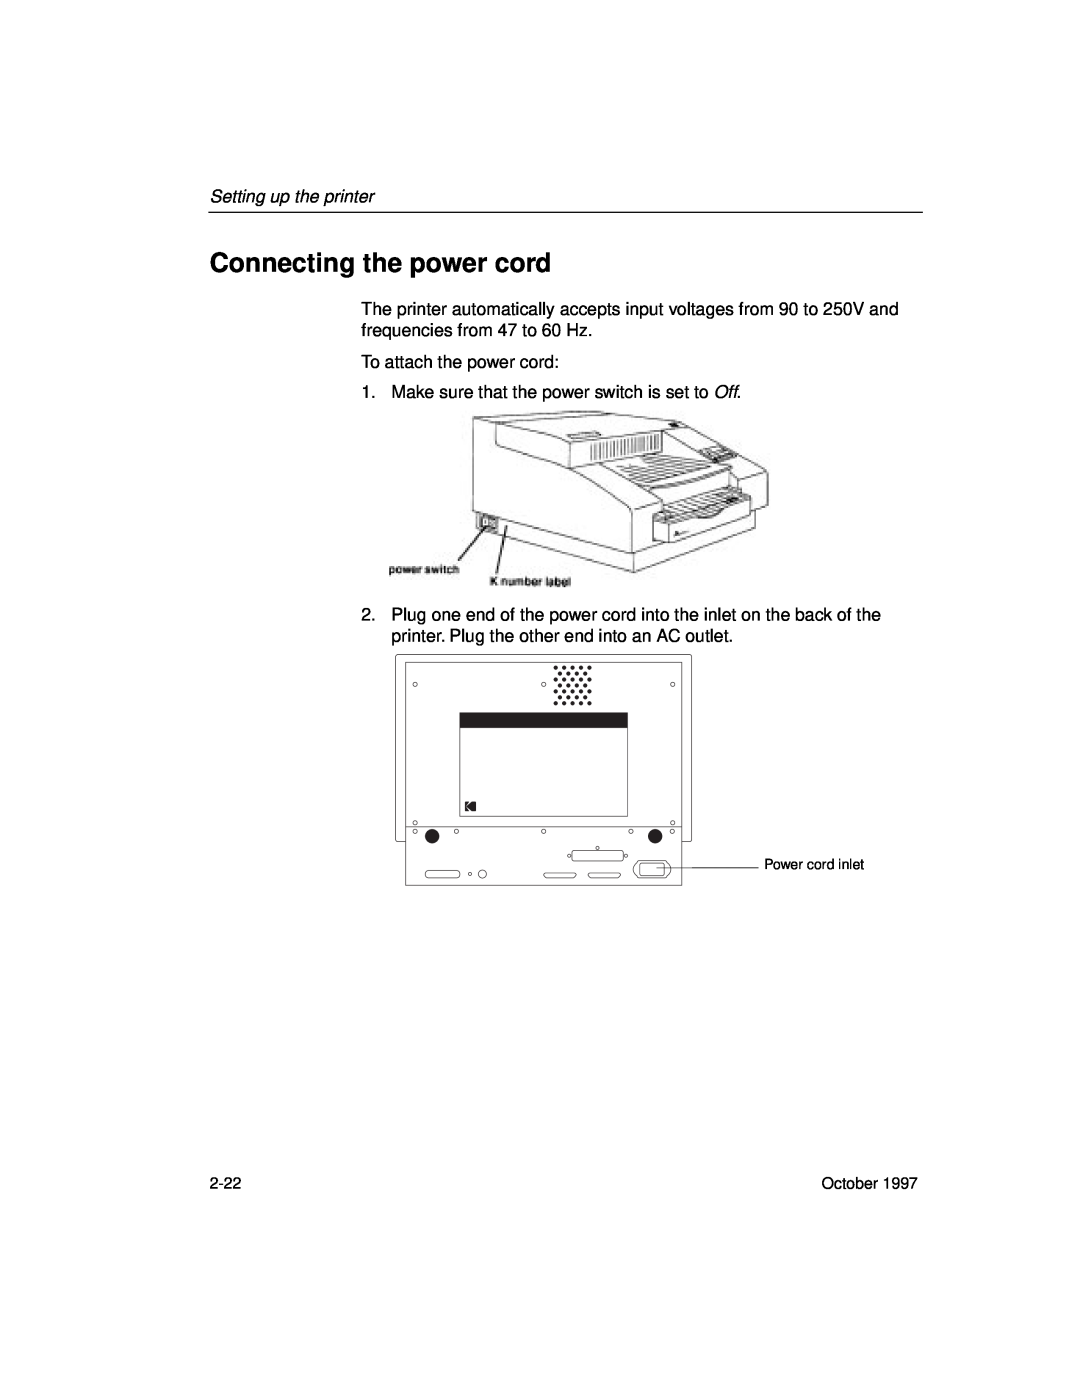 Kodak 8650 manual Connecting the power cord, Setting up the printer, Power cord inlet, 2-22, October 